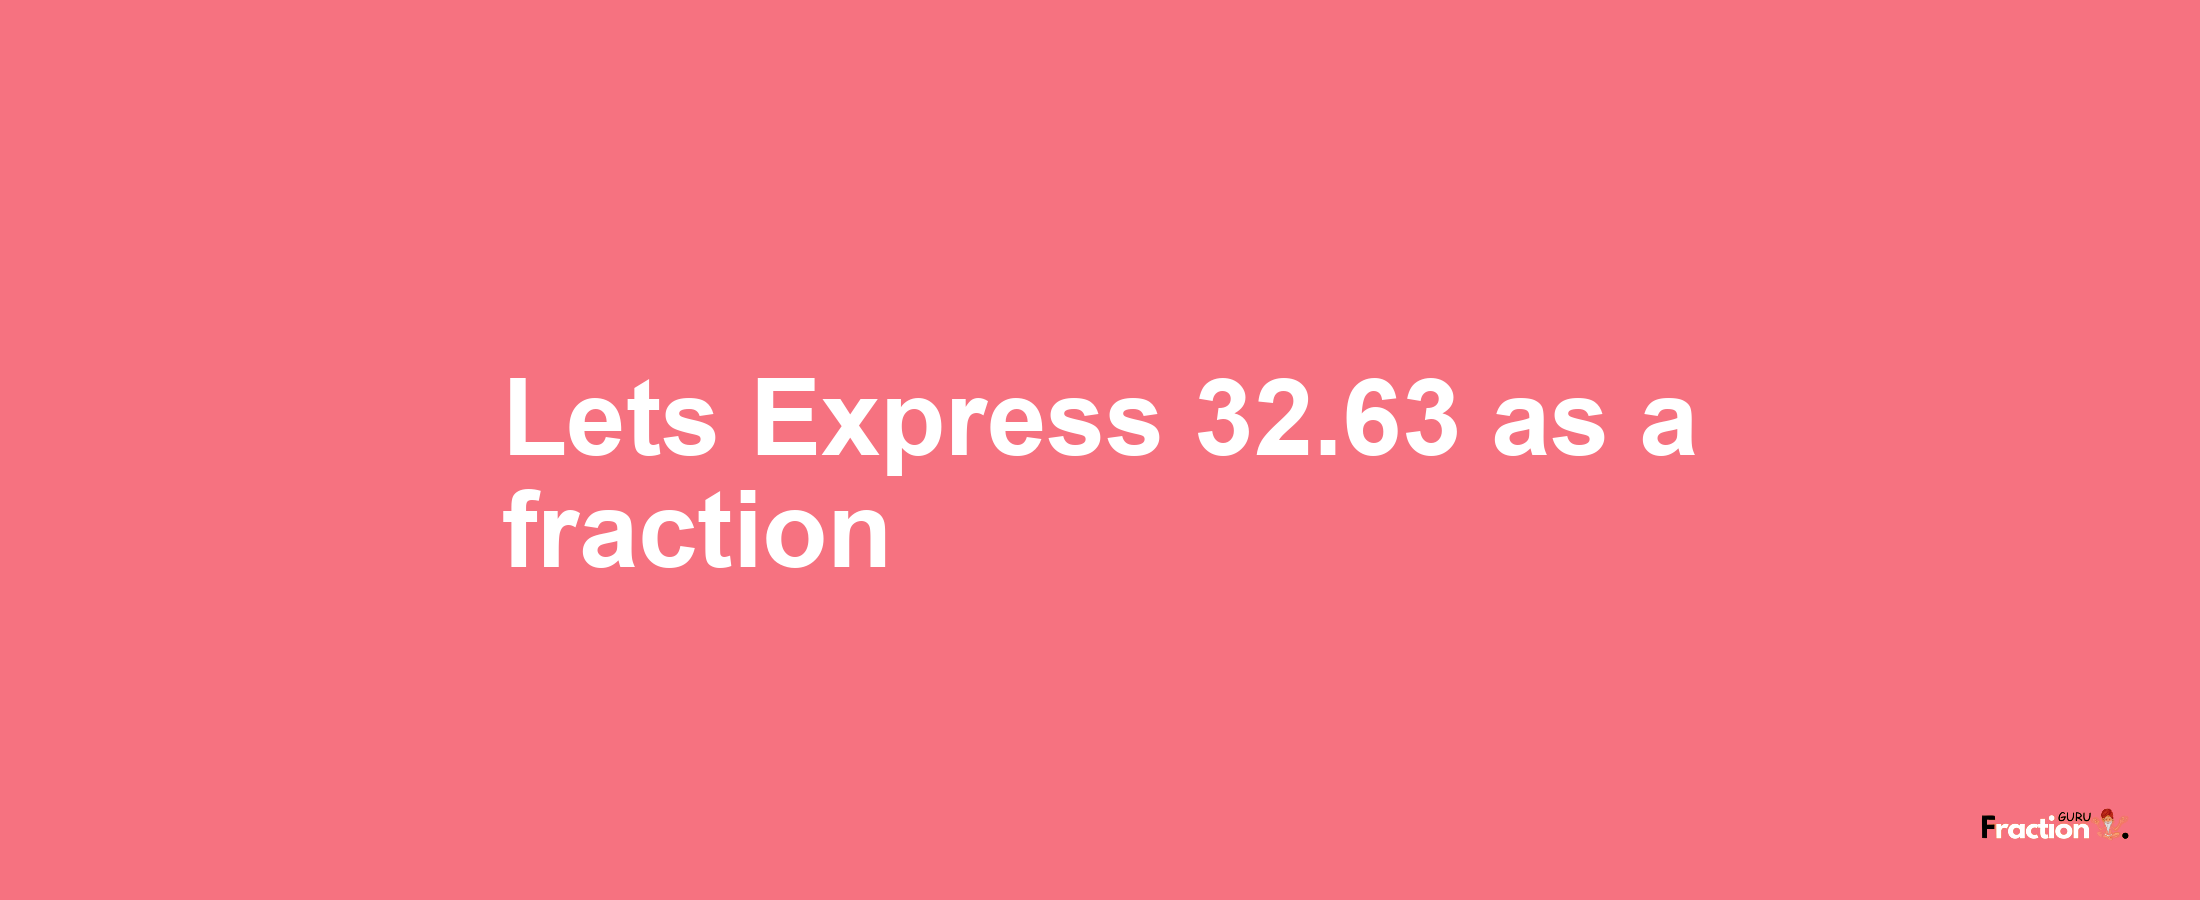 Lets Express 32.63 as afraction